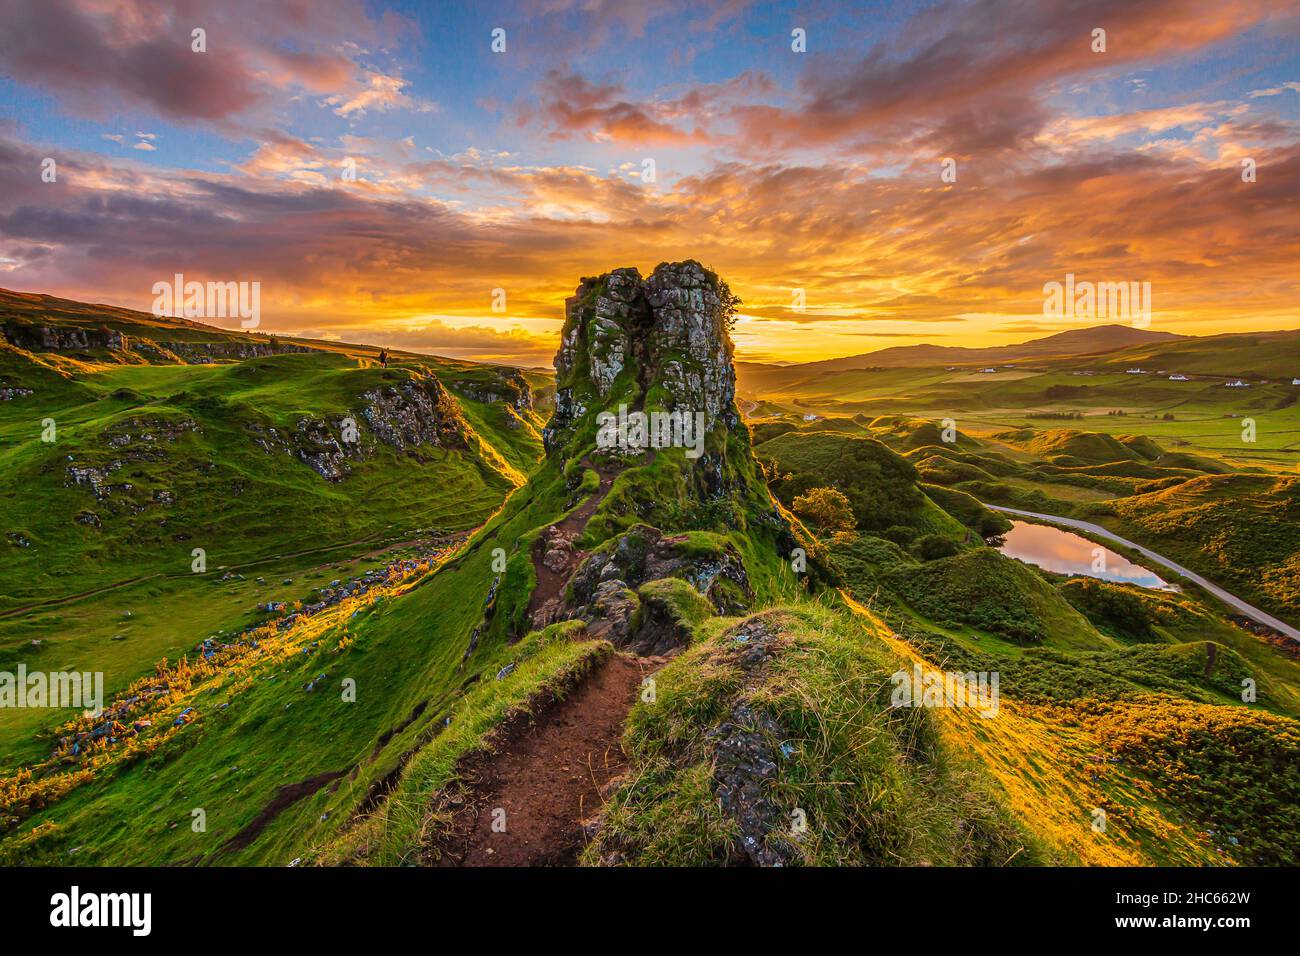 Sunset on the Isle of Skye in Scotland. Castle Ewen mountain hill with paths and meadow in the evening. Red and orange clouds in the sky. small lake w Stock Photo